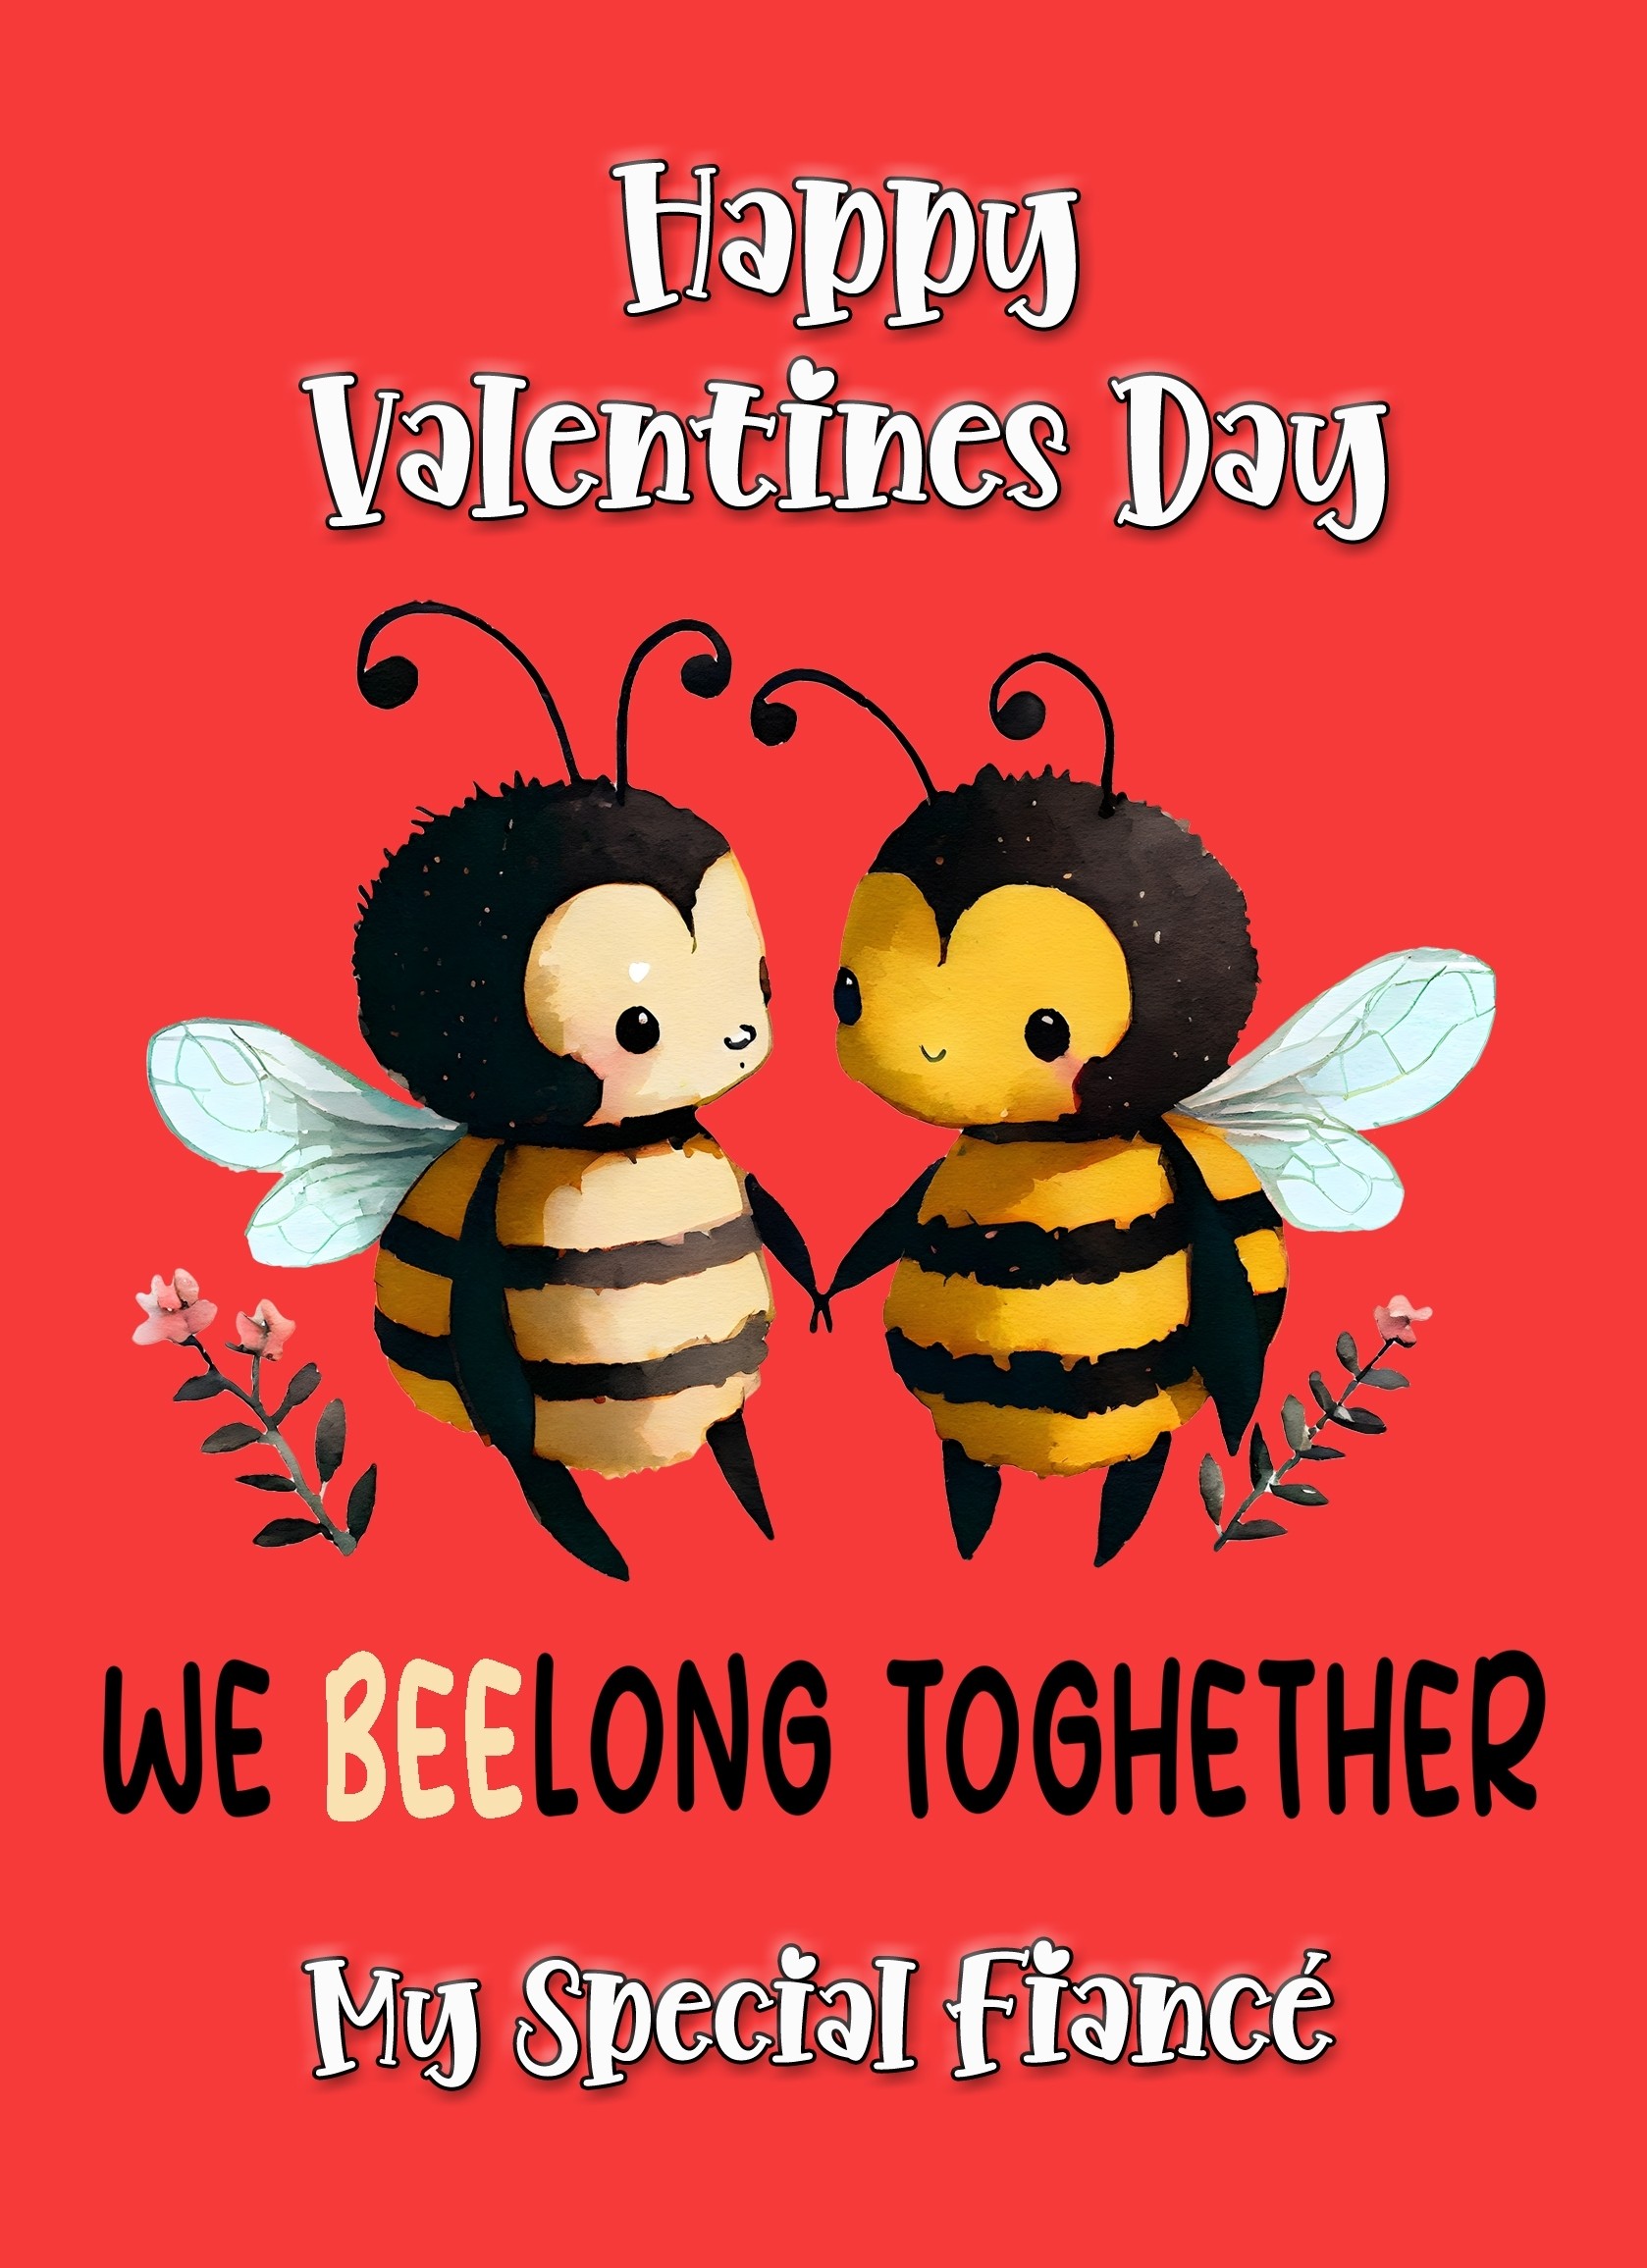 Funny Pun Valentines Day Card for Fiance (Beelong Together)